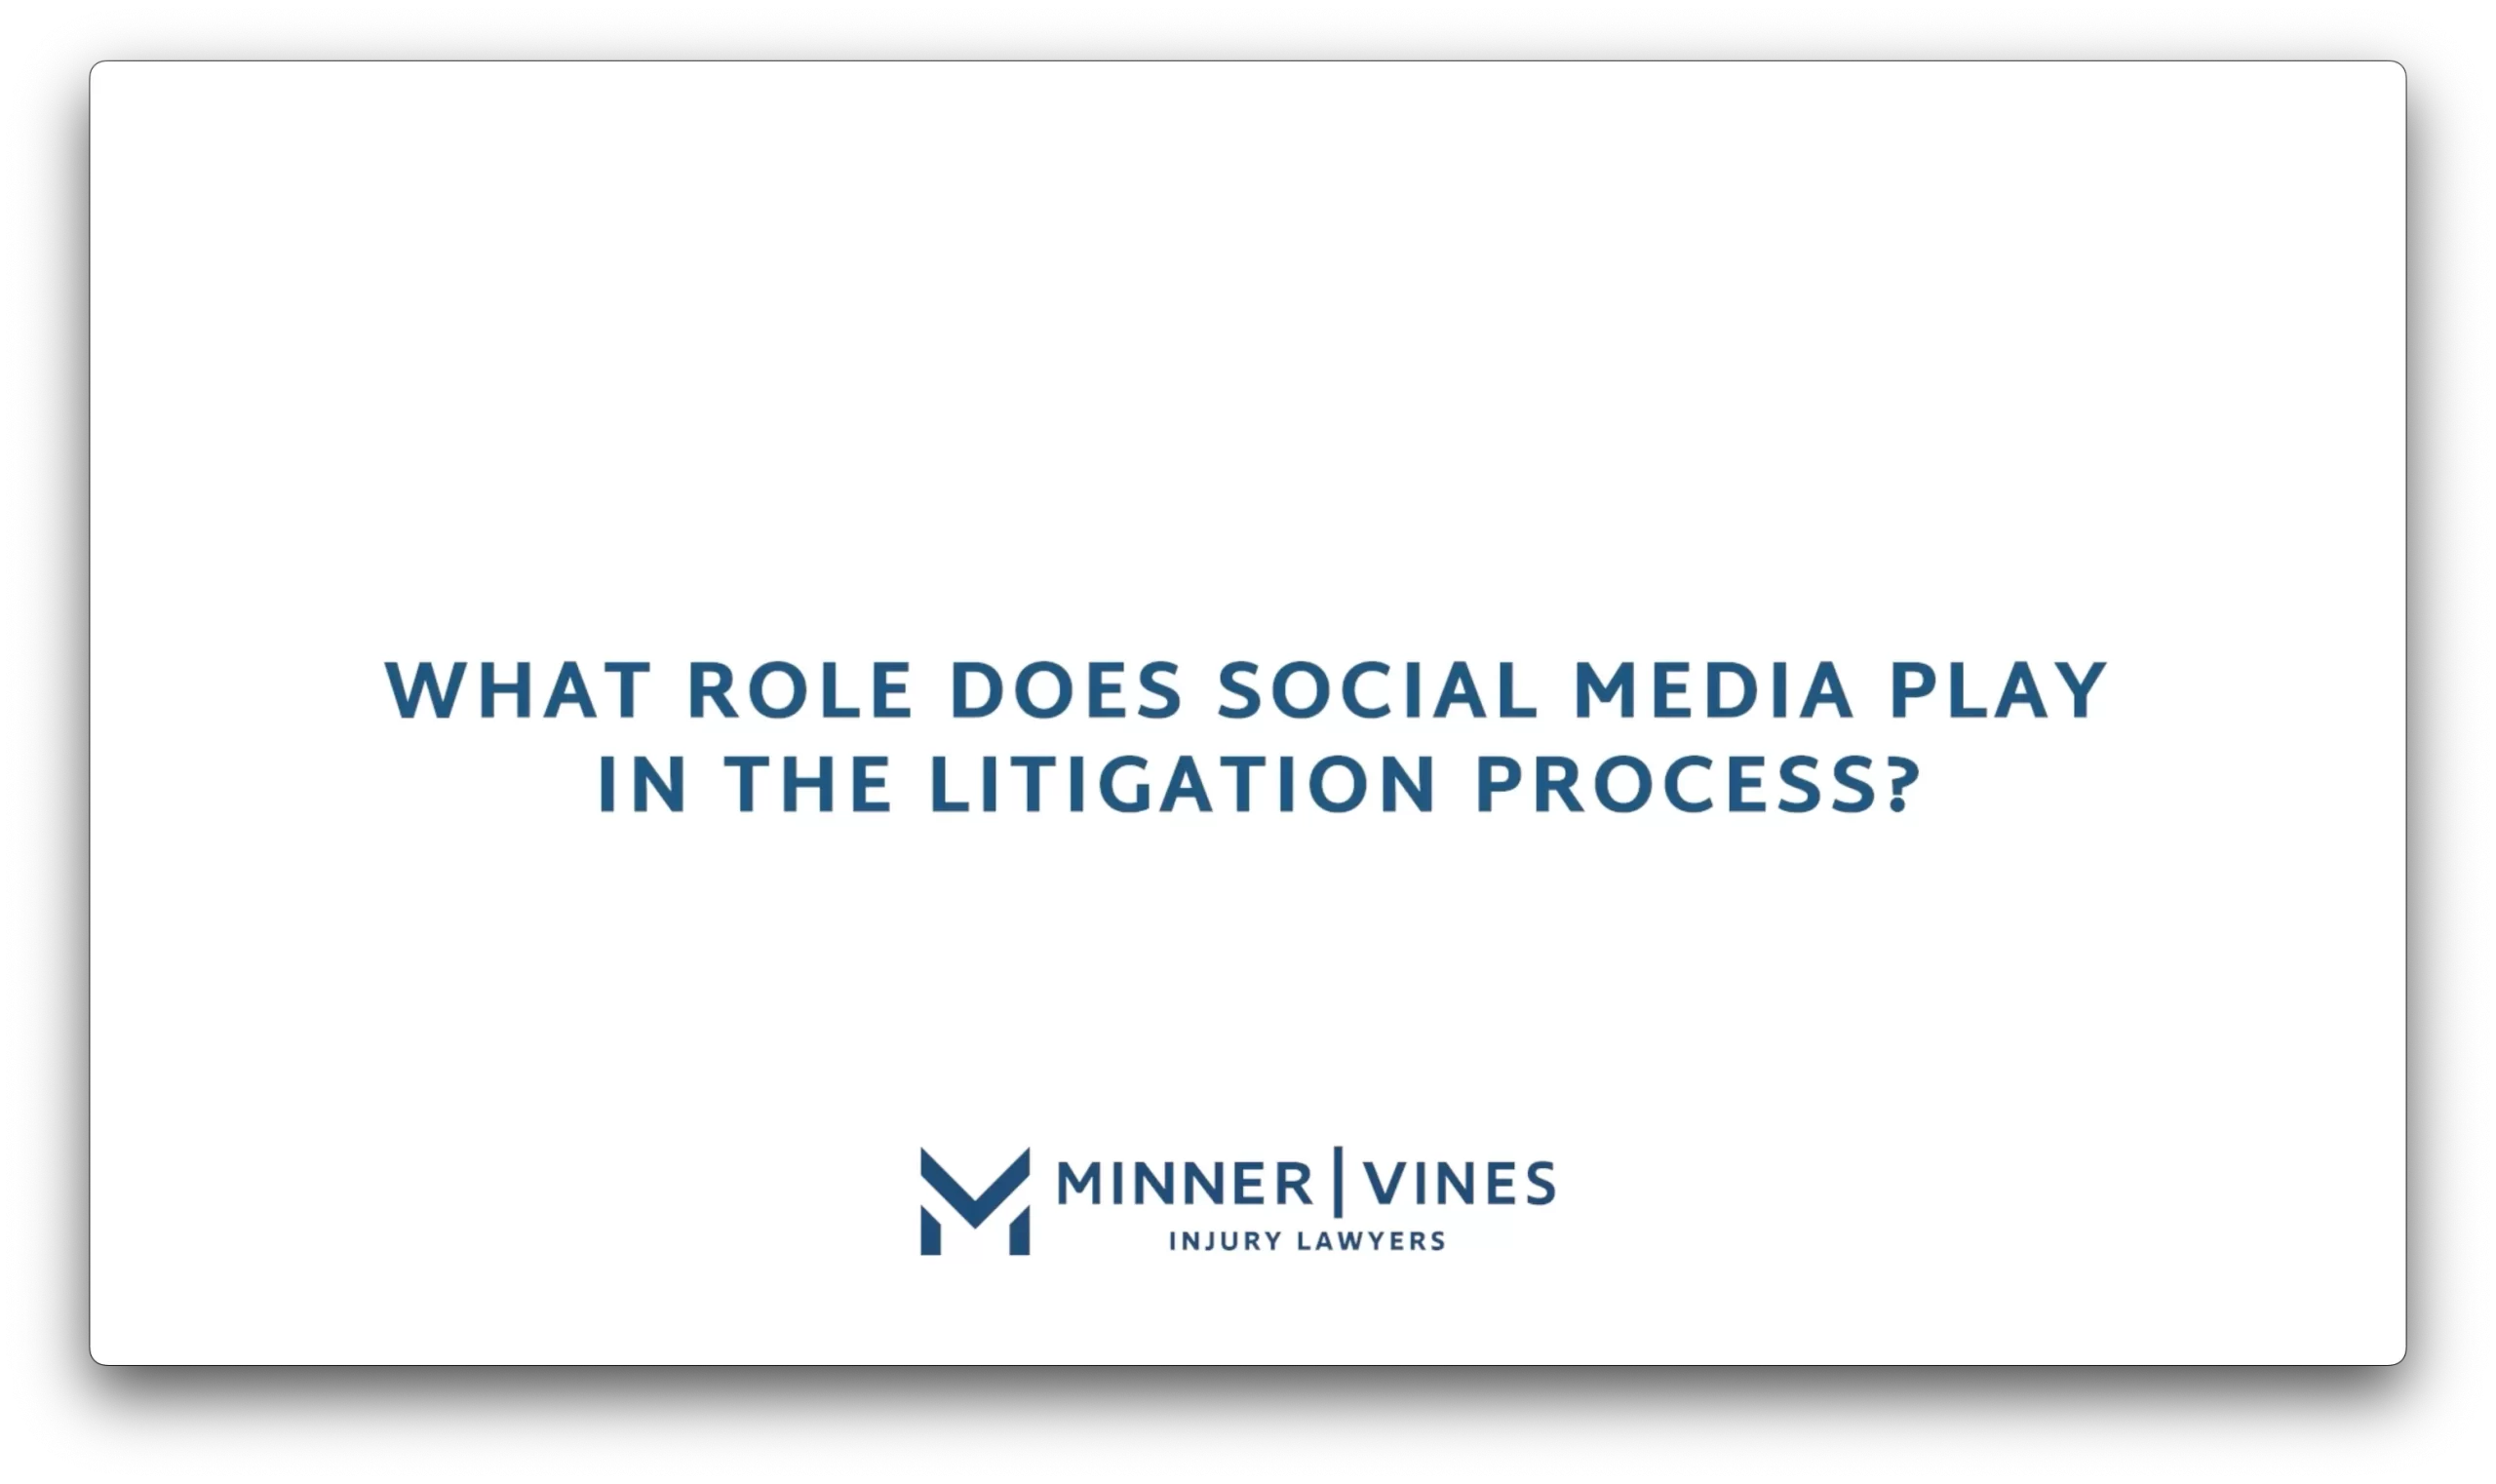 What role does social media play in the litigation process?